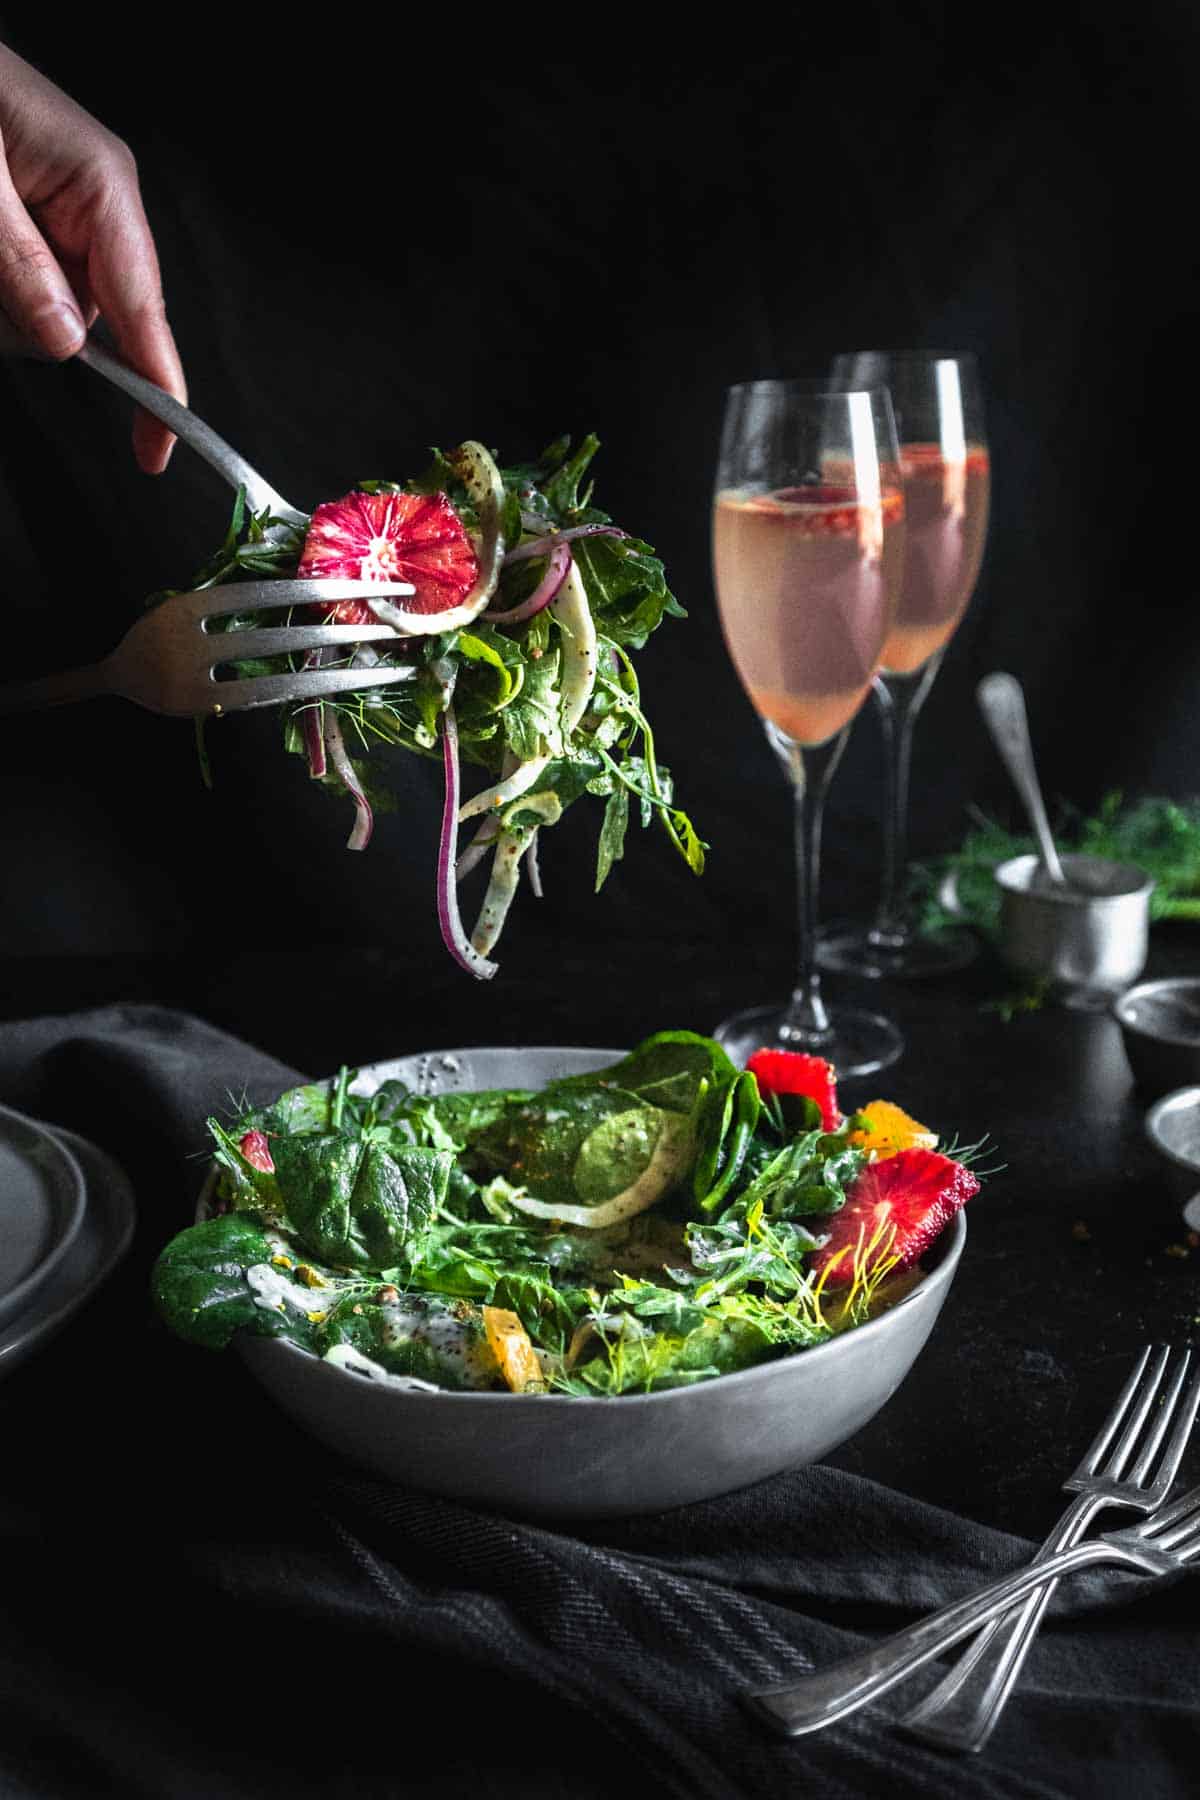 Blood orange salad being pulled from the bowl with serving utensils. The salad is next to two forks and two flutes of sparkling pink cocktails